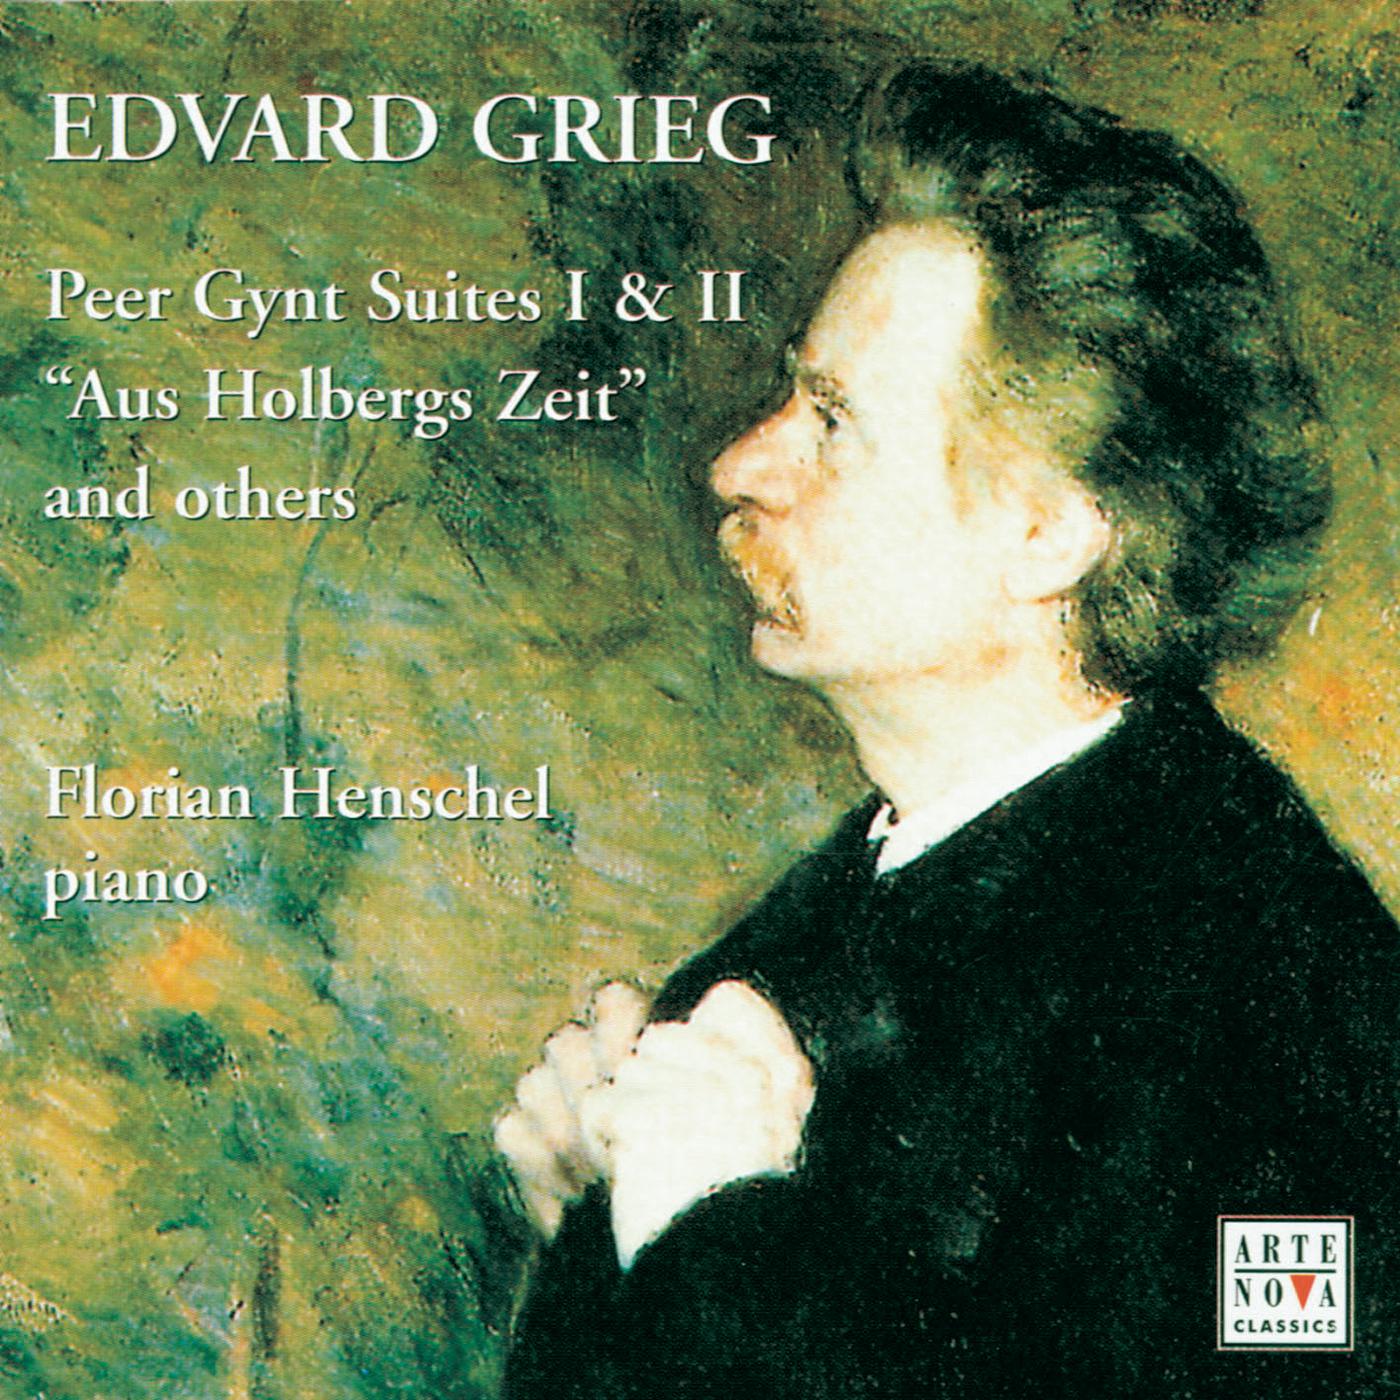 Peer Gynt Suite No. 1, Op. 46, Arr. for Piano:II. The Death of Ase